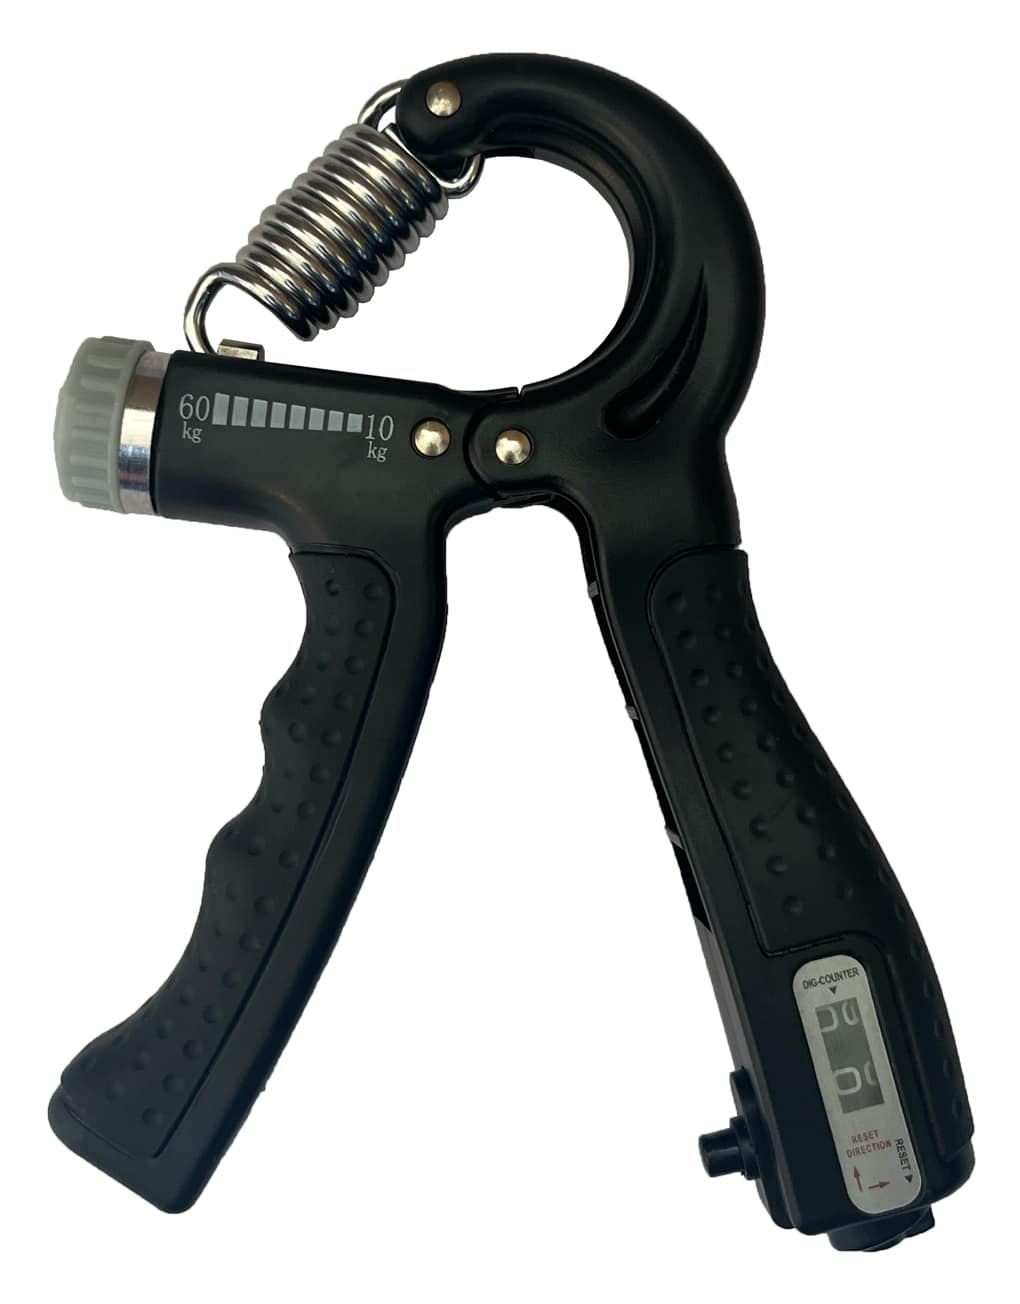 Hand Grips Grip Strength Machine Male 100kg Adjustable Professional  Advanced Wrist Hand Forearm Trainer 230816 From Bong07, $31.34